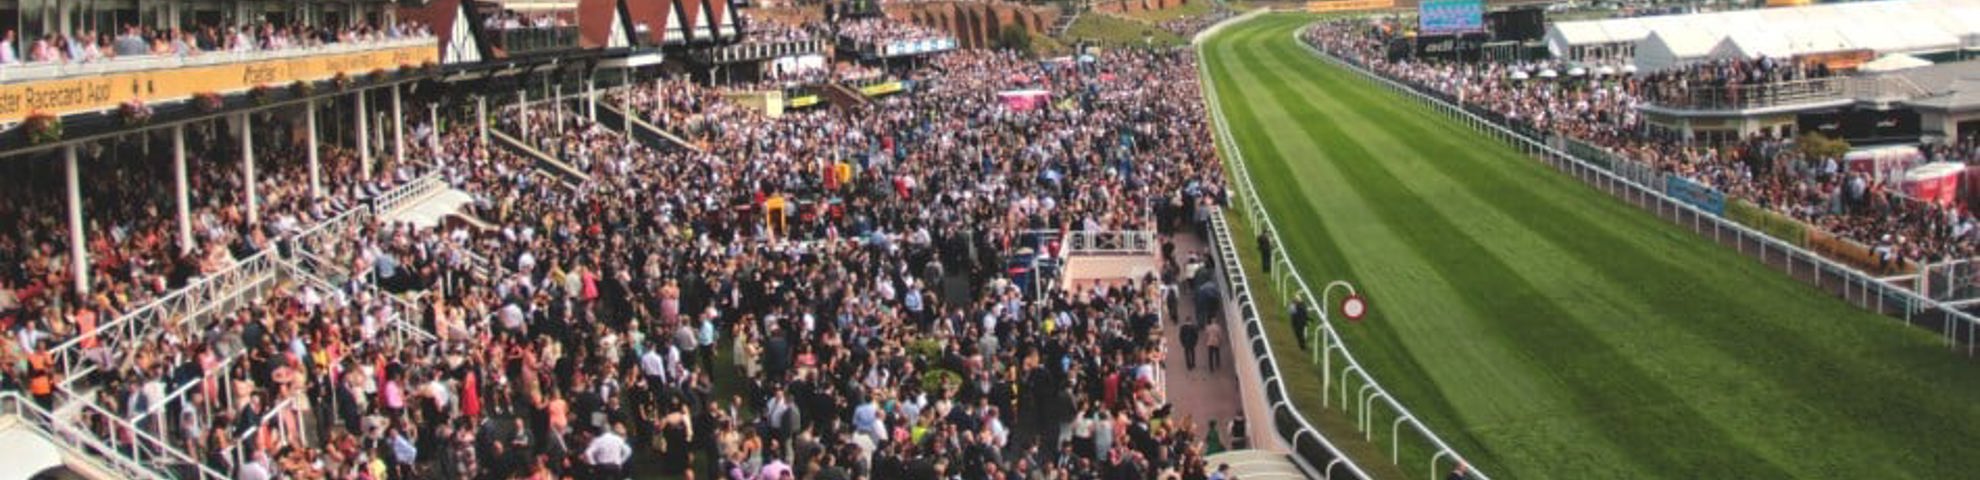 A large crowd outdoors watching the horse racing.